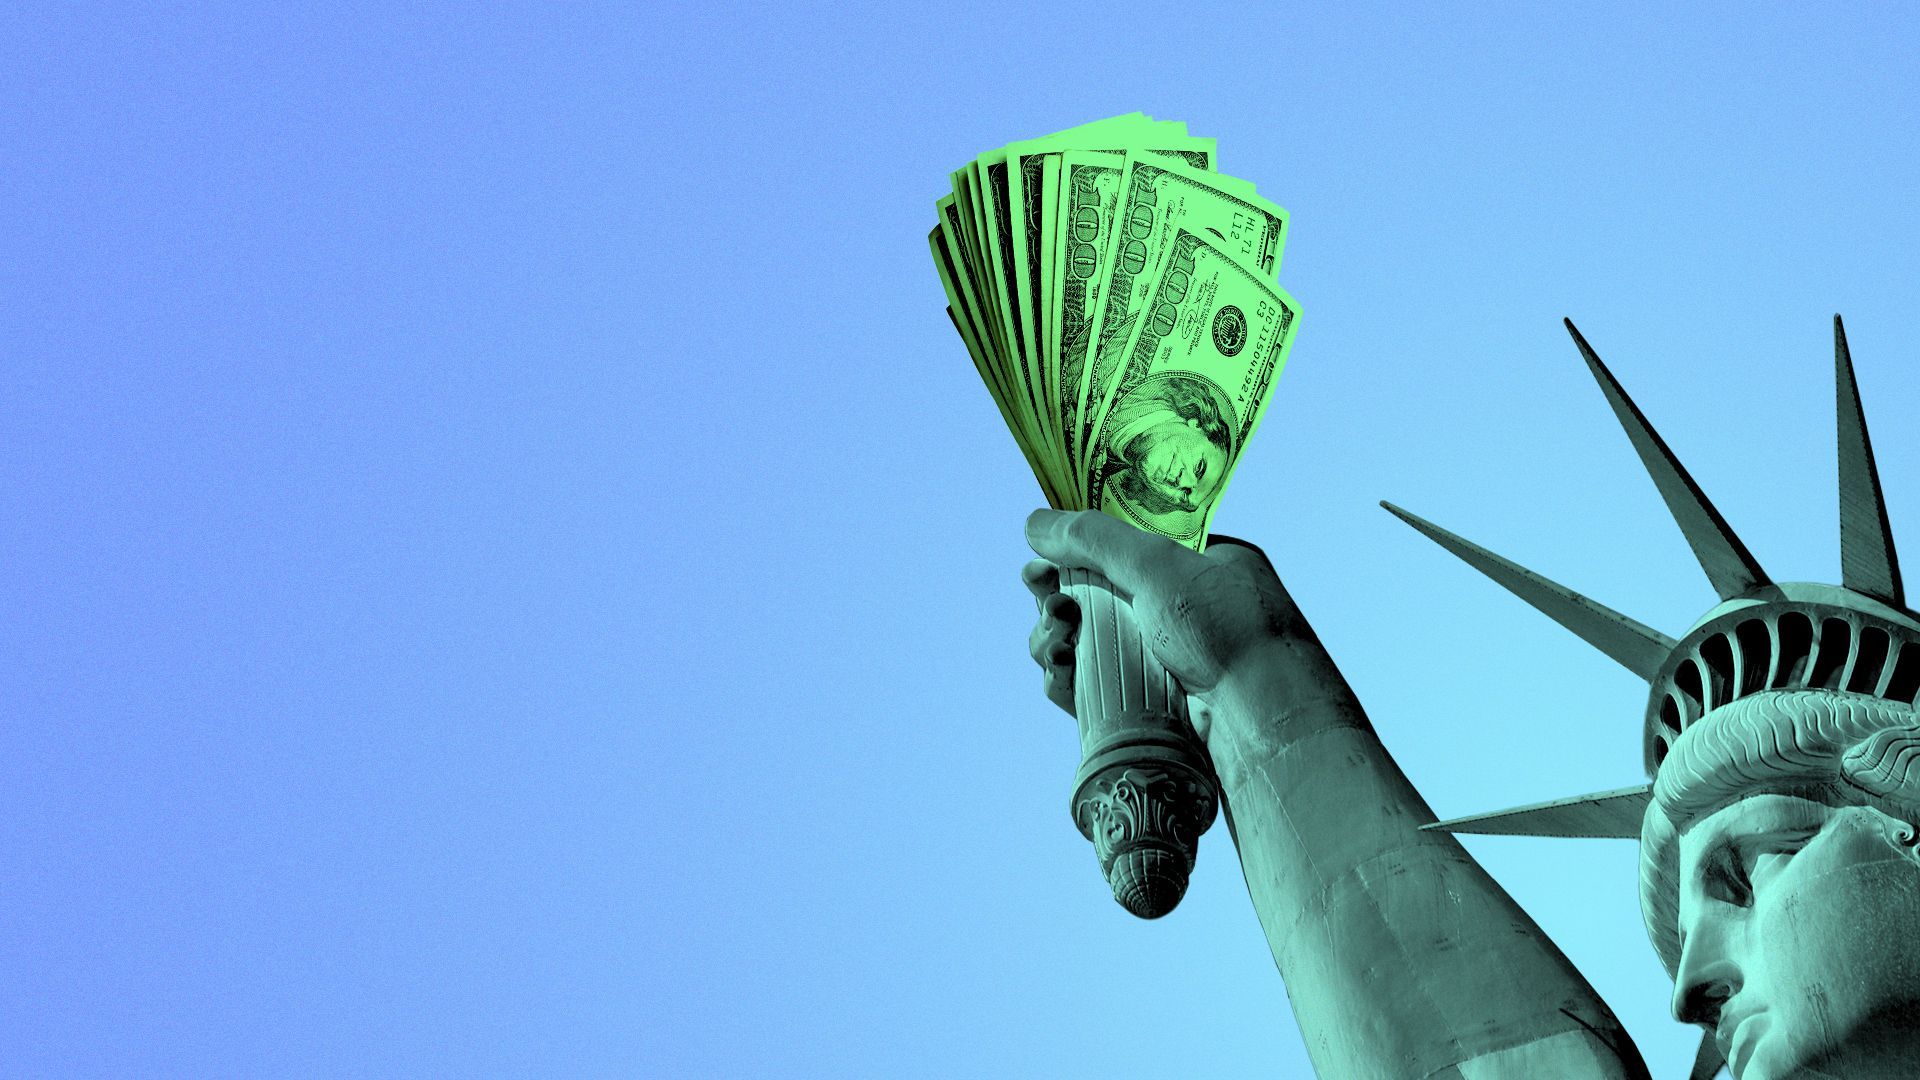 Illustration of the Statue of Liberty holding cash instead of a torch.